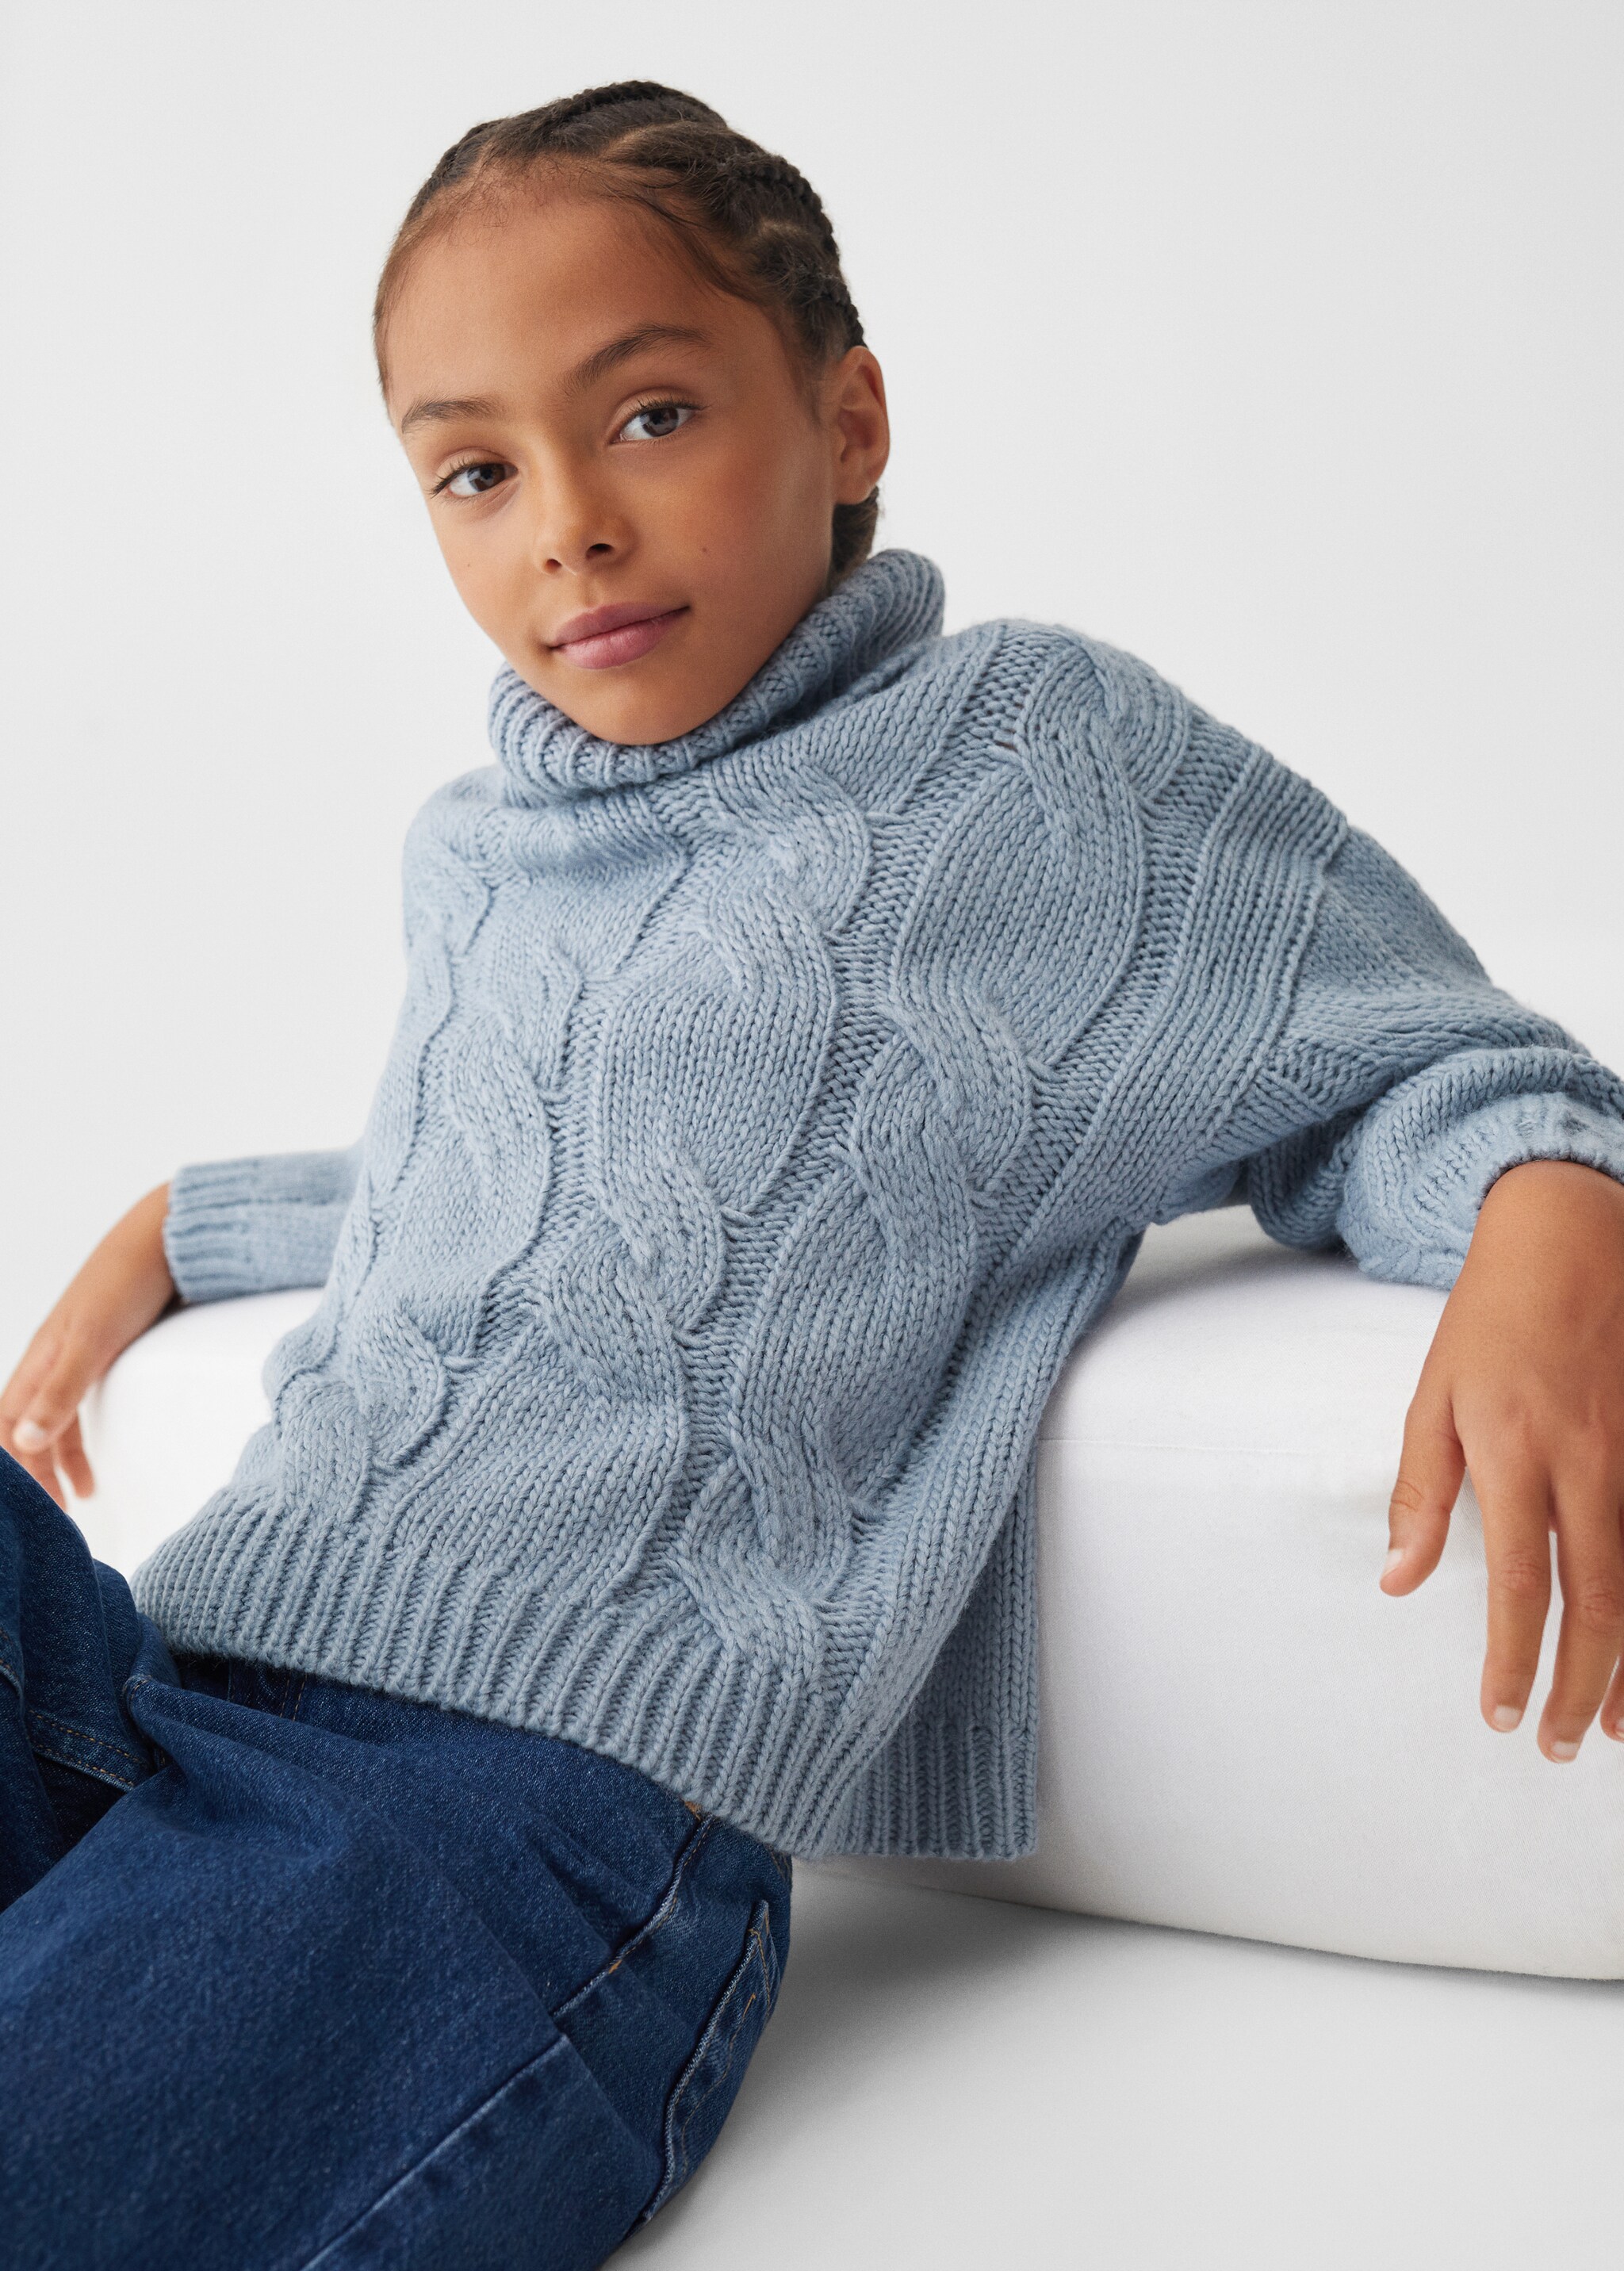 Turtleneck knit sweater - Details of the article 2